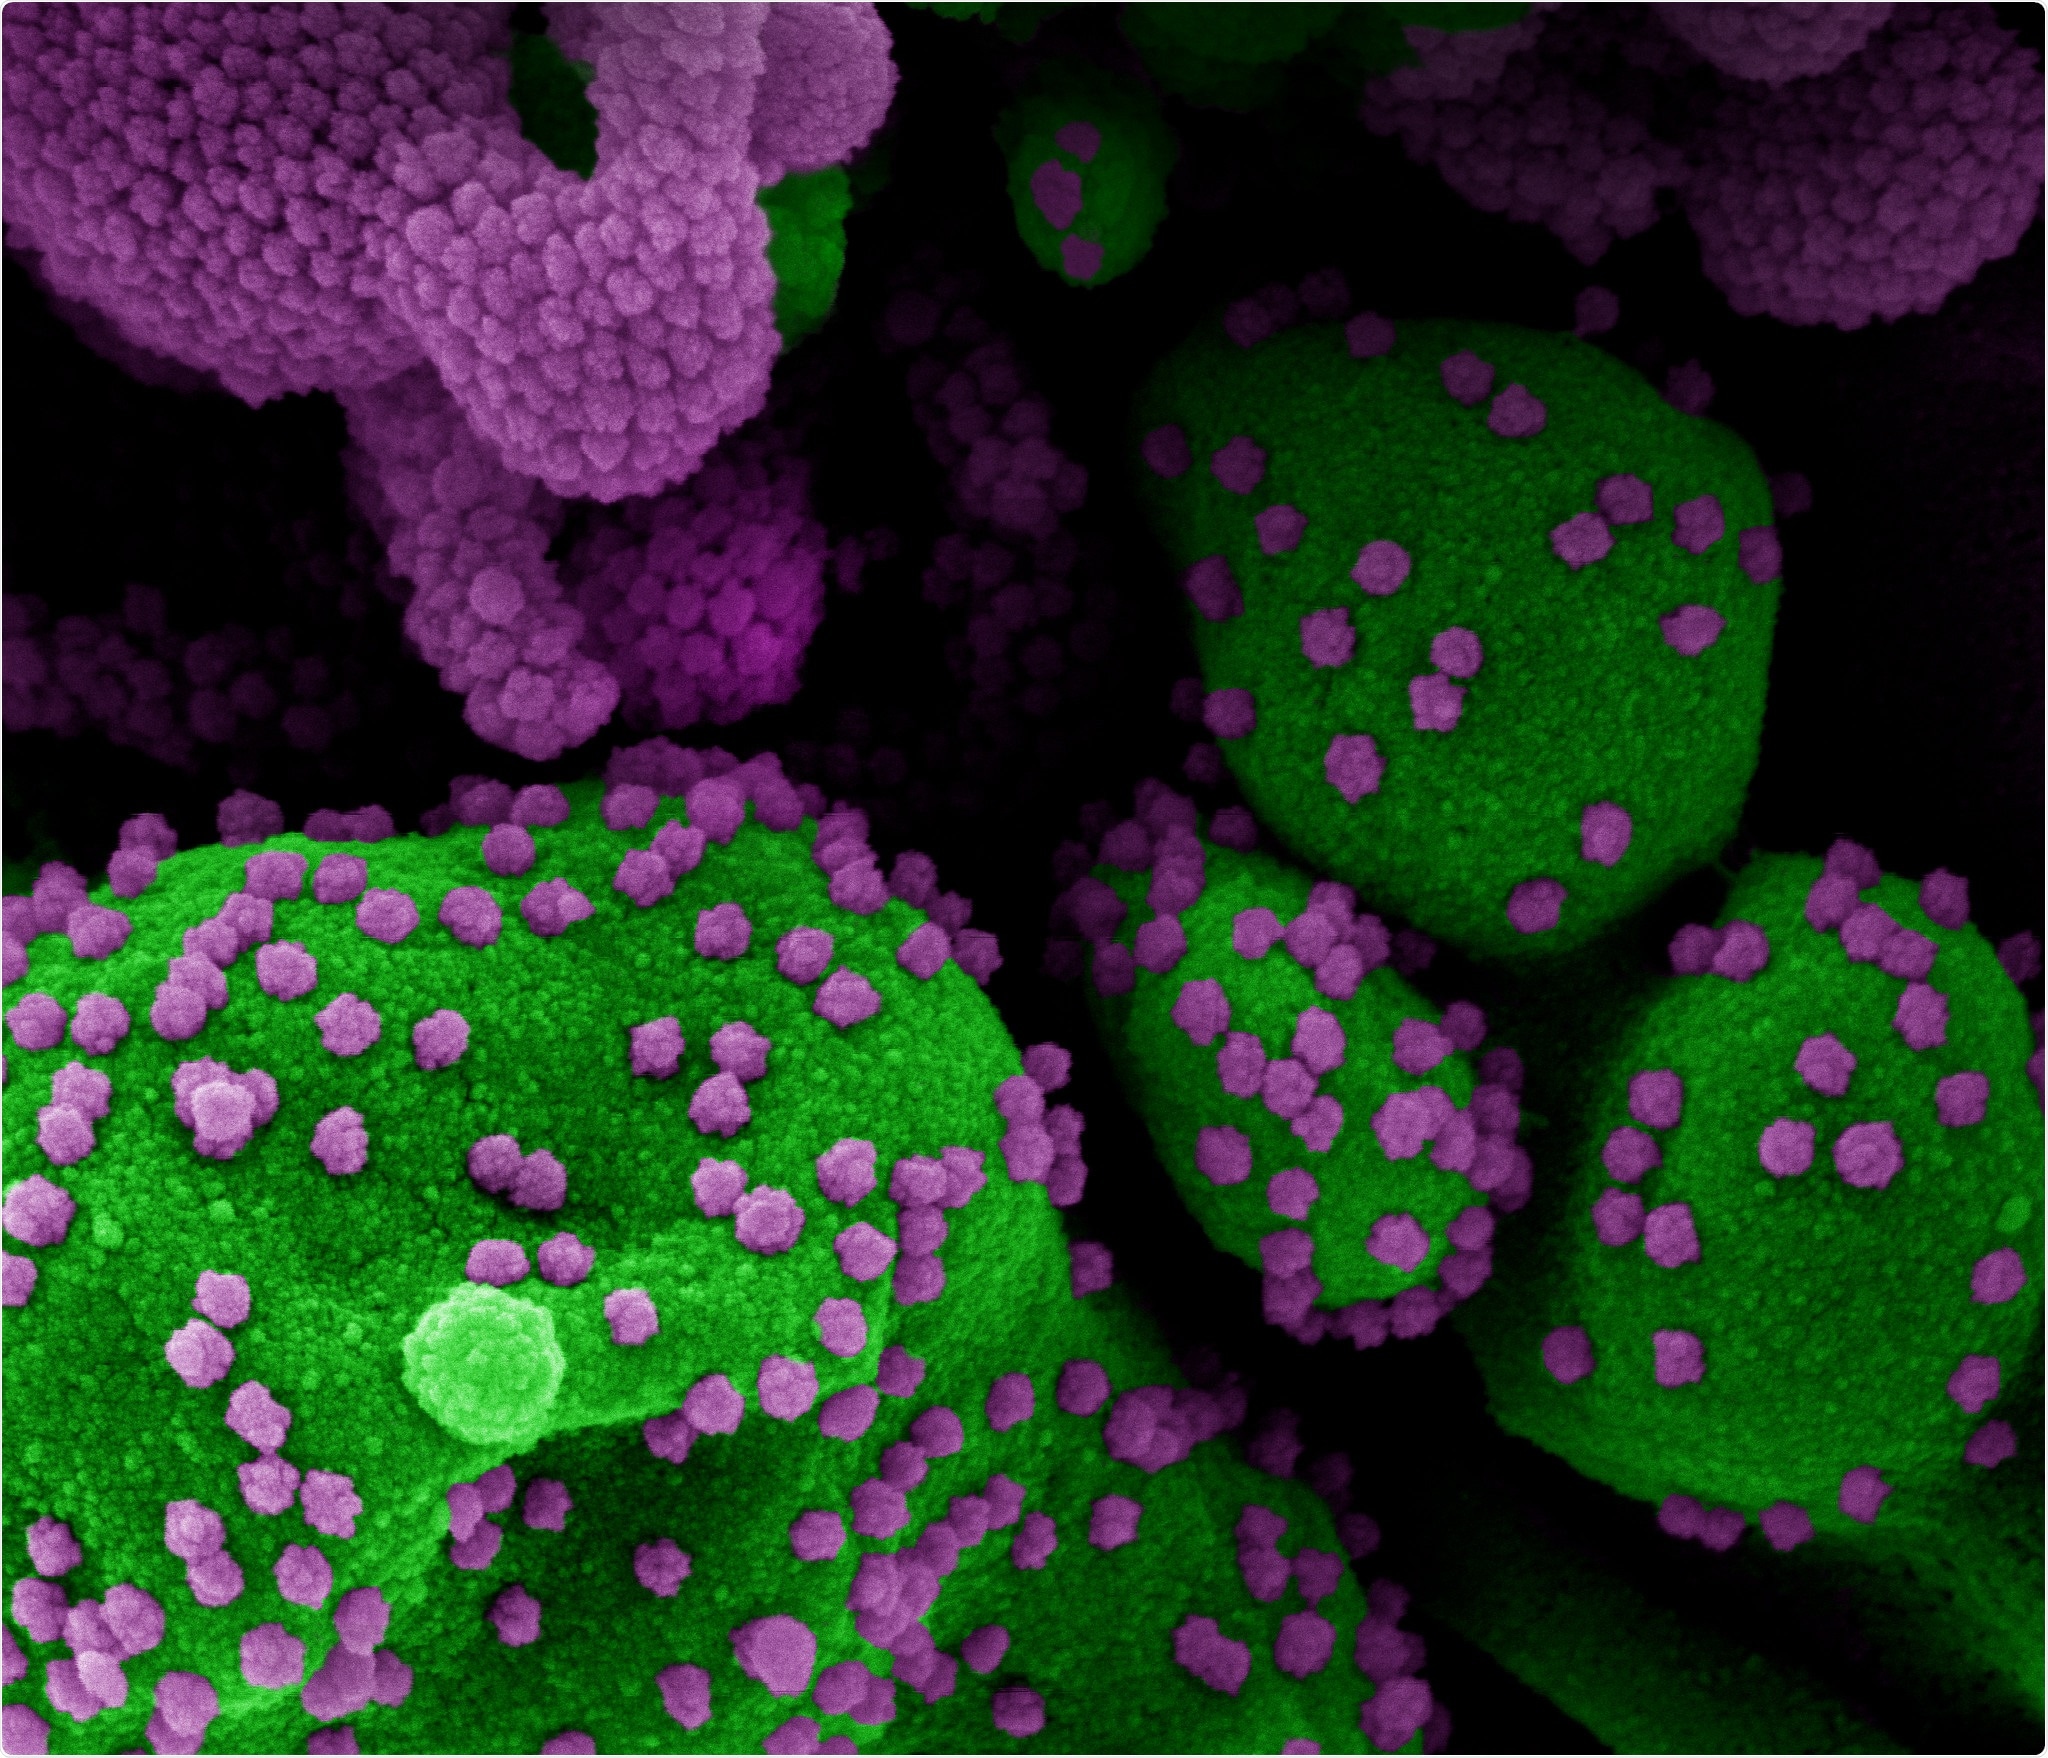 Novel Coronavirus SARS-CoV-2 Colorized scanning electron micrograph of an apoptotic cell (green) heavily infected with SARS-COV-2 virus particles (purple), isolated from a patient sample. Image at the NIAID Integrated Research Facility (IRF) in Fort Detrick, Maryland. Credit: NIAID